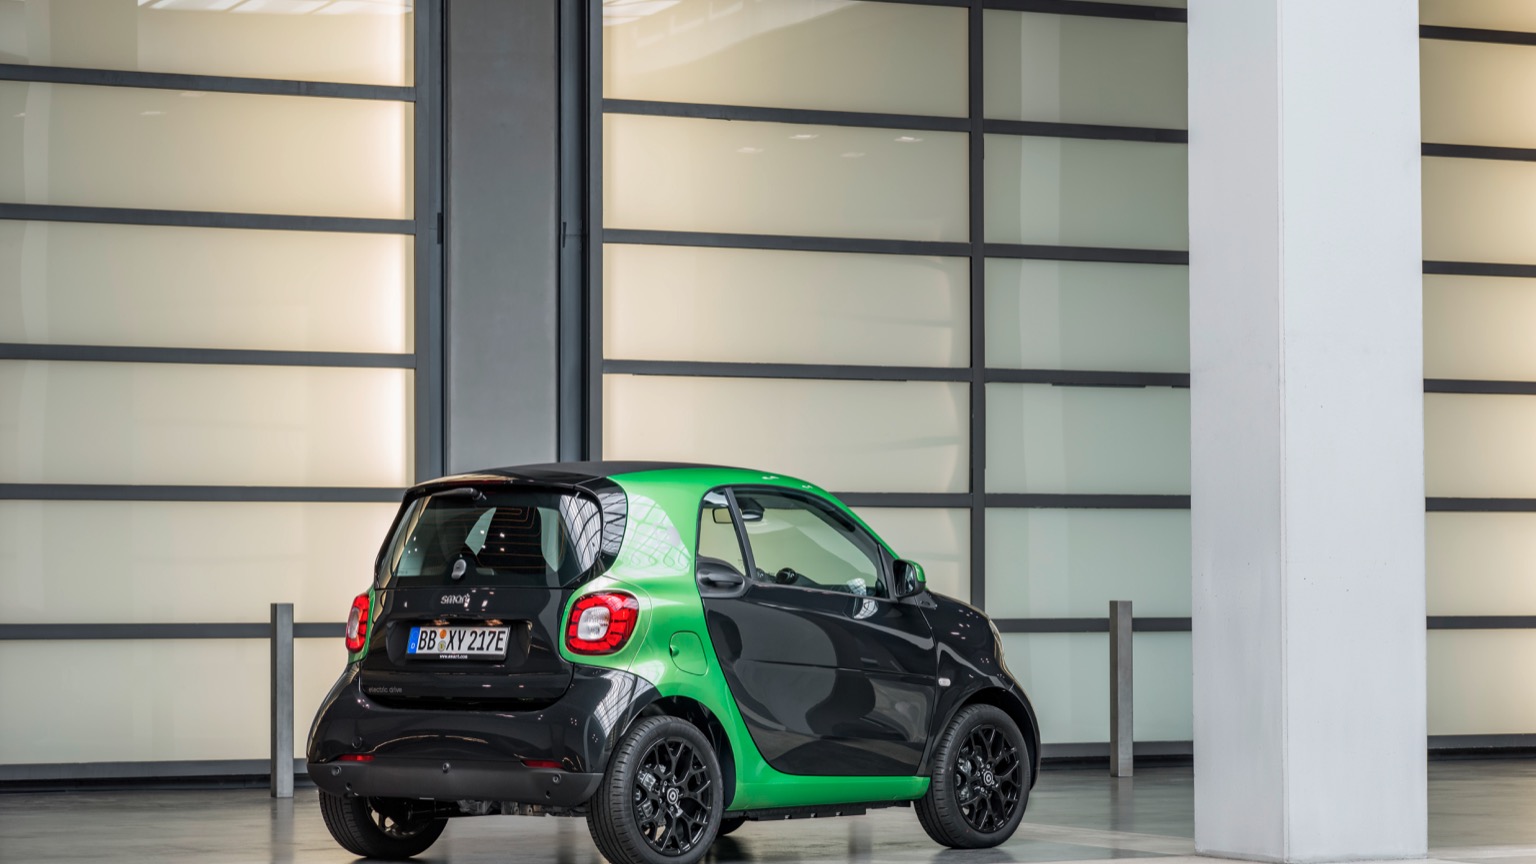 Smart_fortwo-11